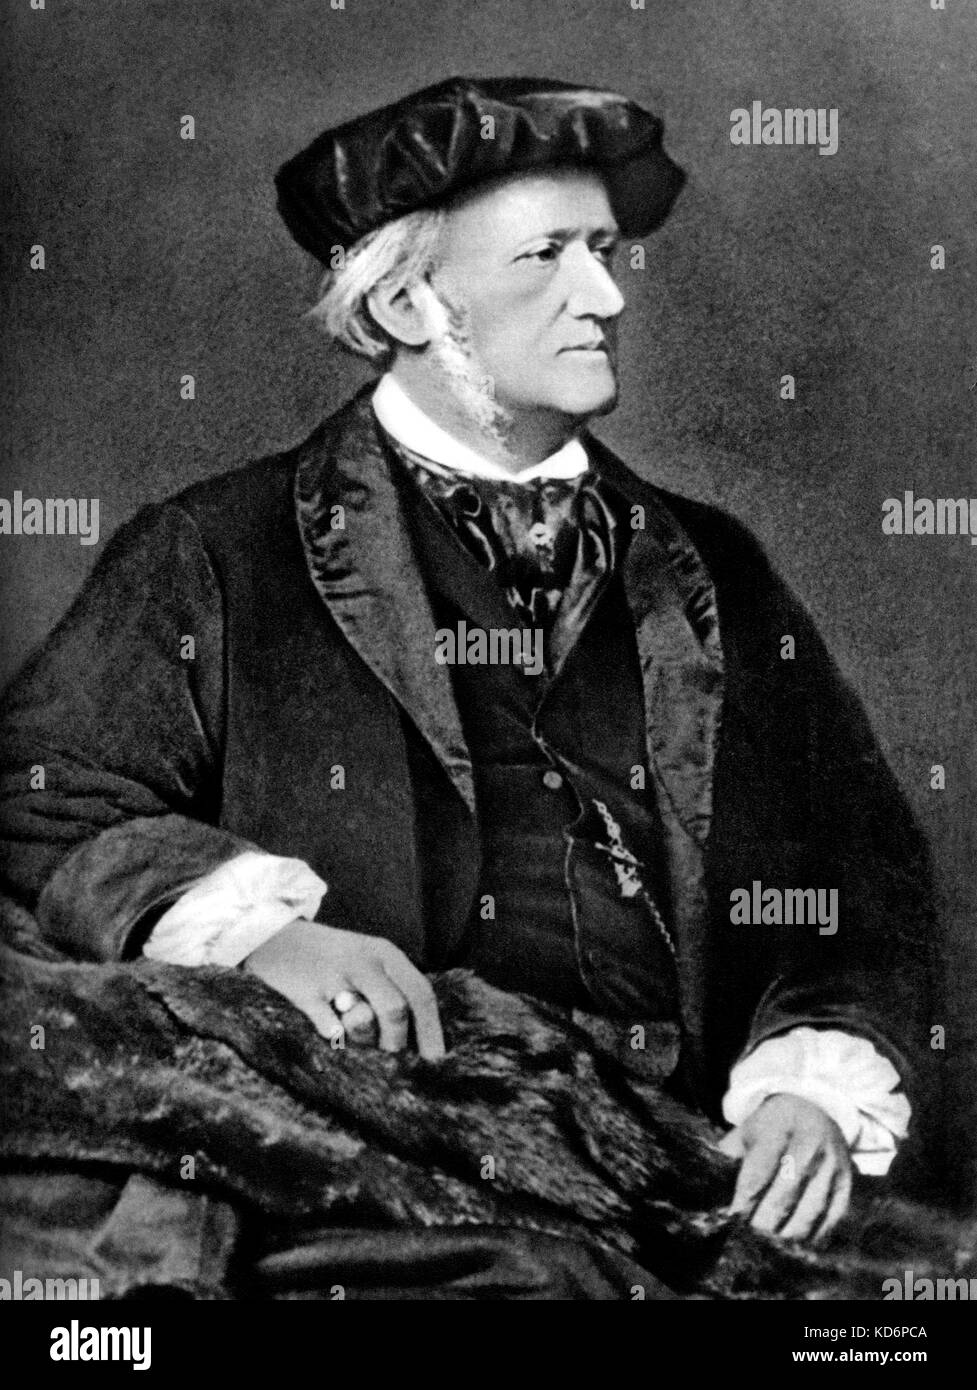 Richard Wagner - portrait of German composer and author. 22 May 1813 - 13 February 1883. Stock Photo